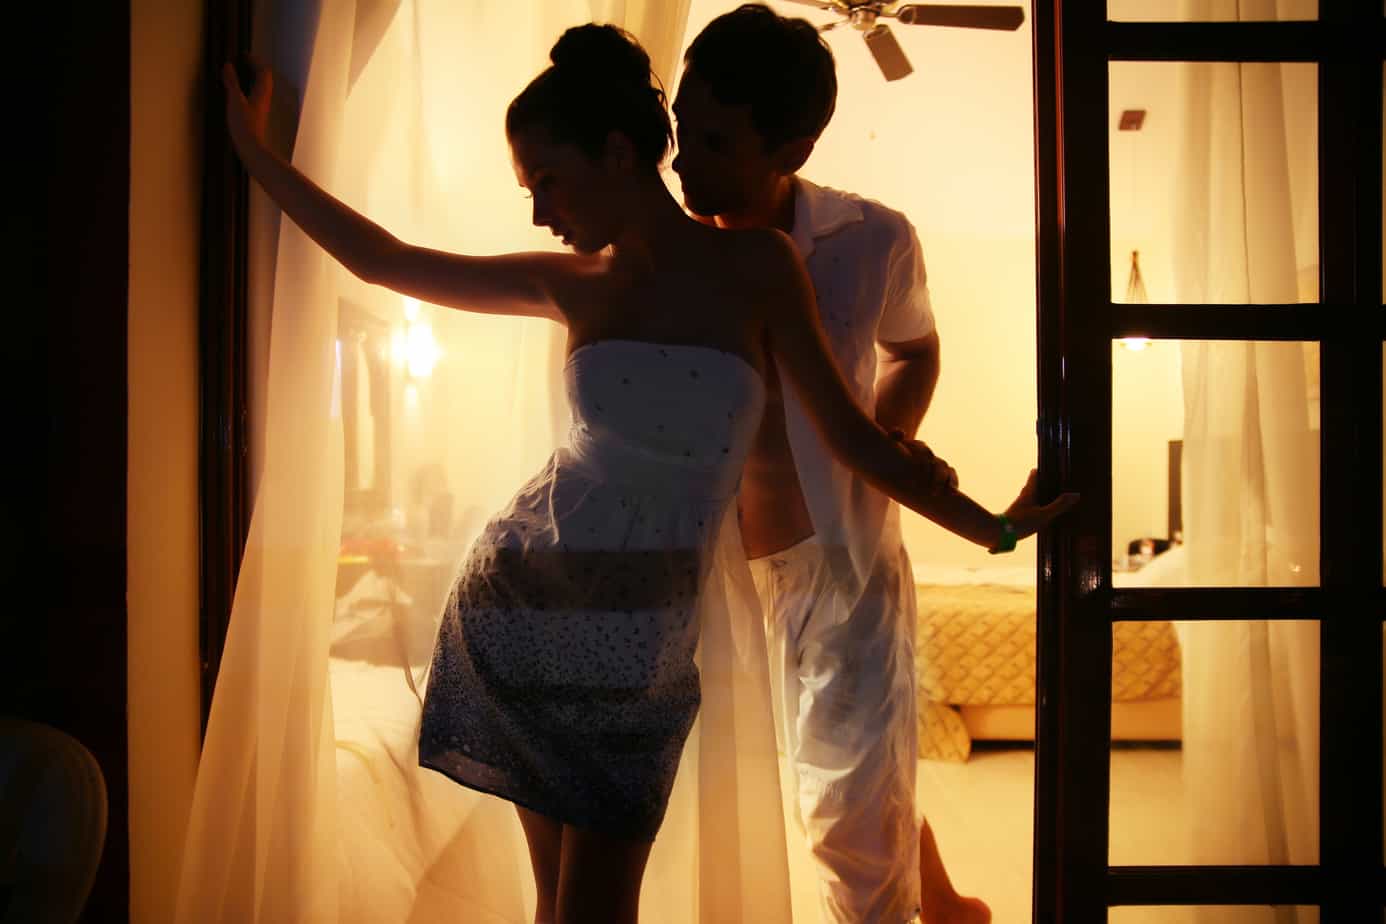 A couple is silhouetted against golden light while standing on a hotel balcony.